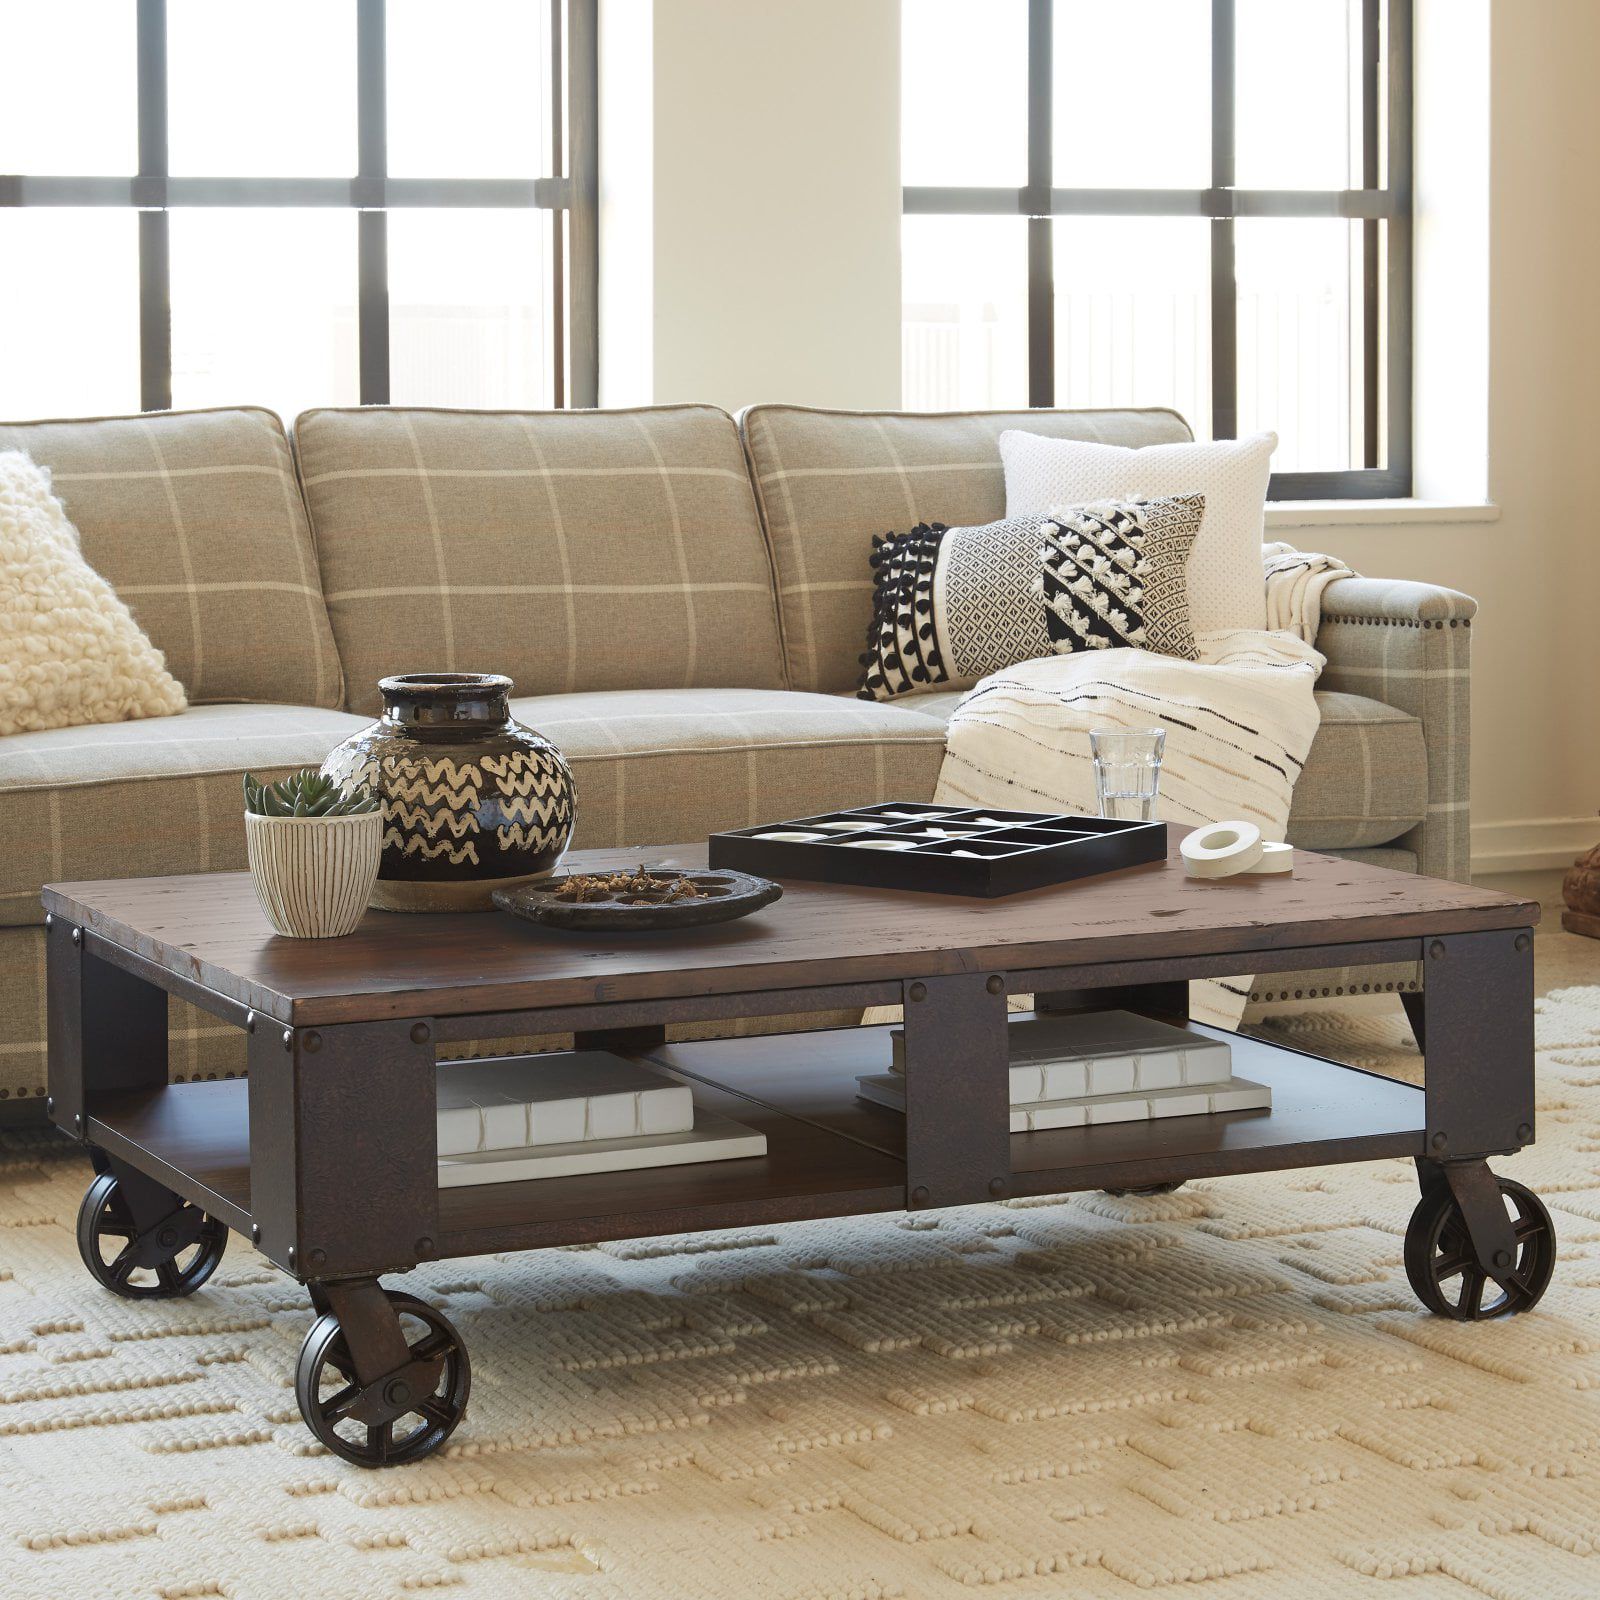 Magnussen T1755 Pinebrook Wood Rectangular Coffee Table With 2 Braking In Coffee Tables With Casters (Gallery 1 of 20)